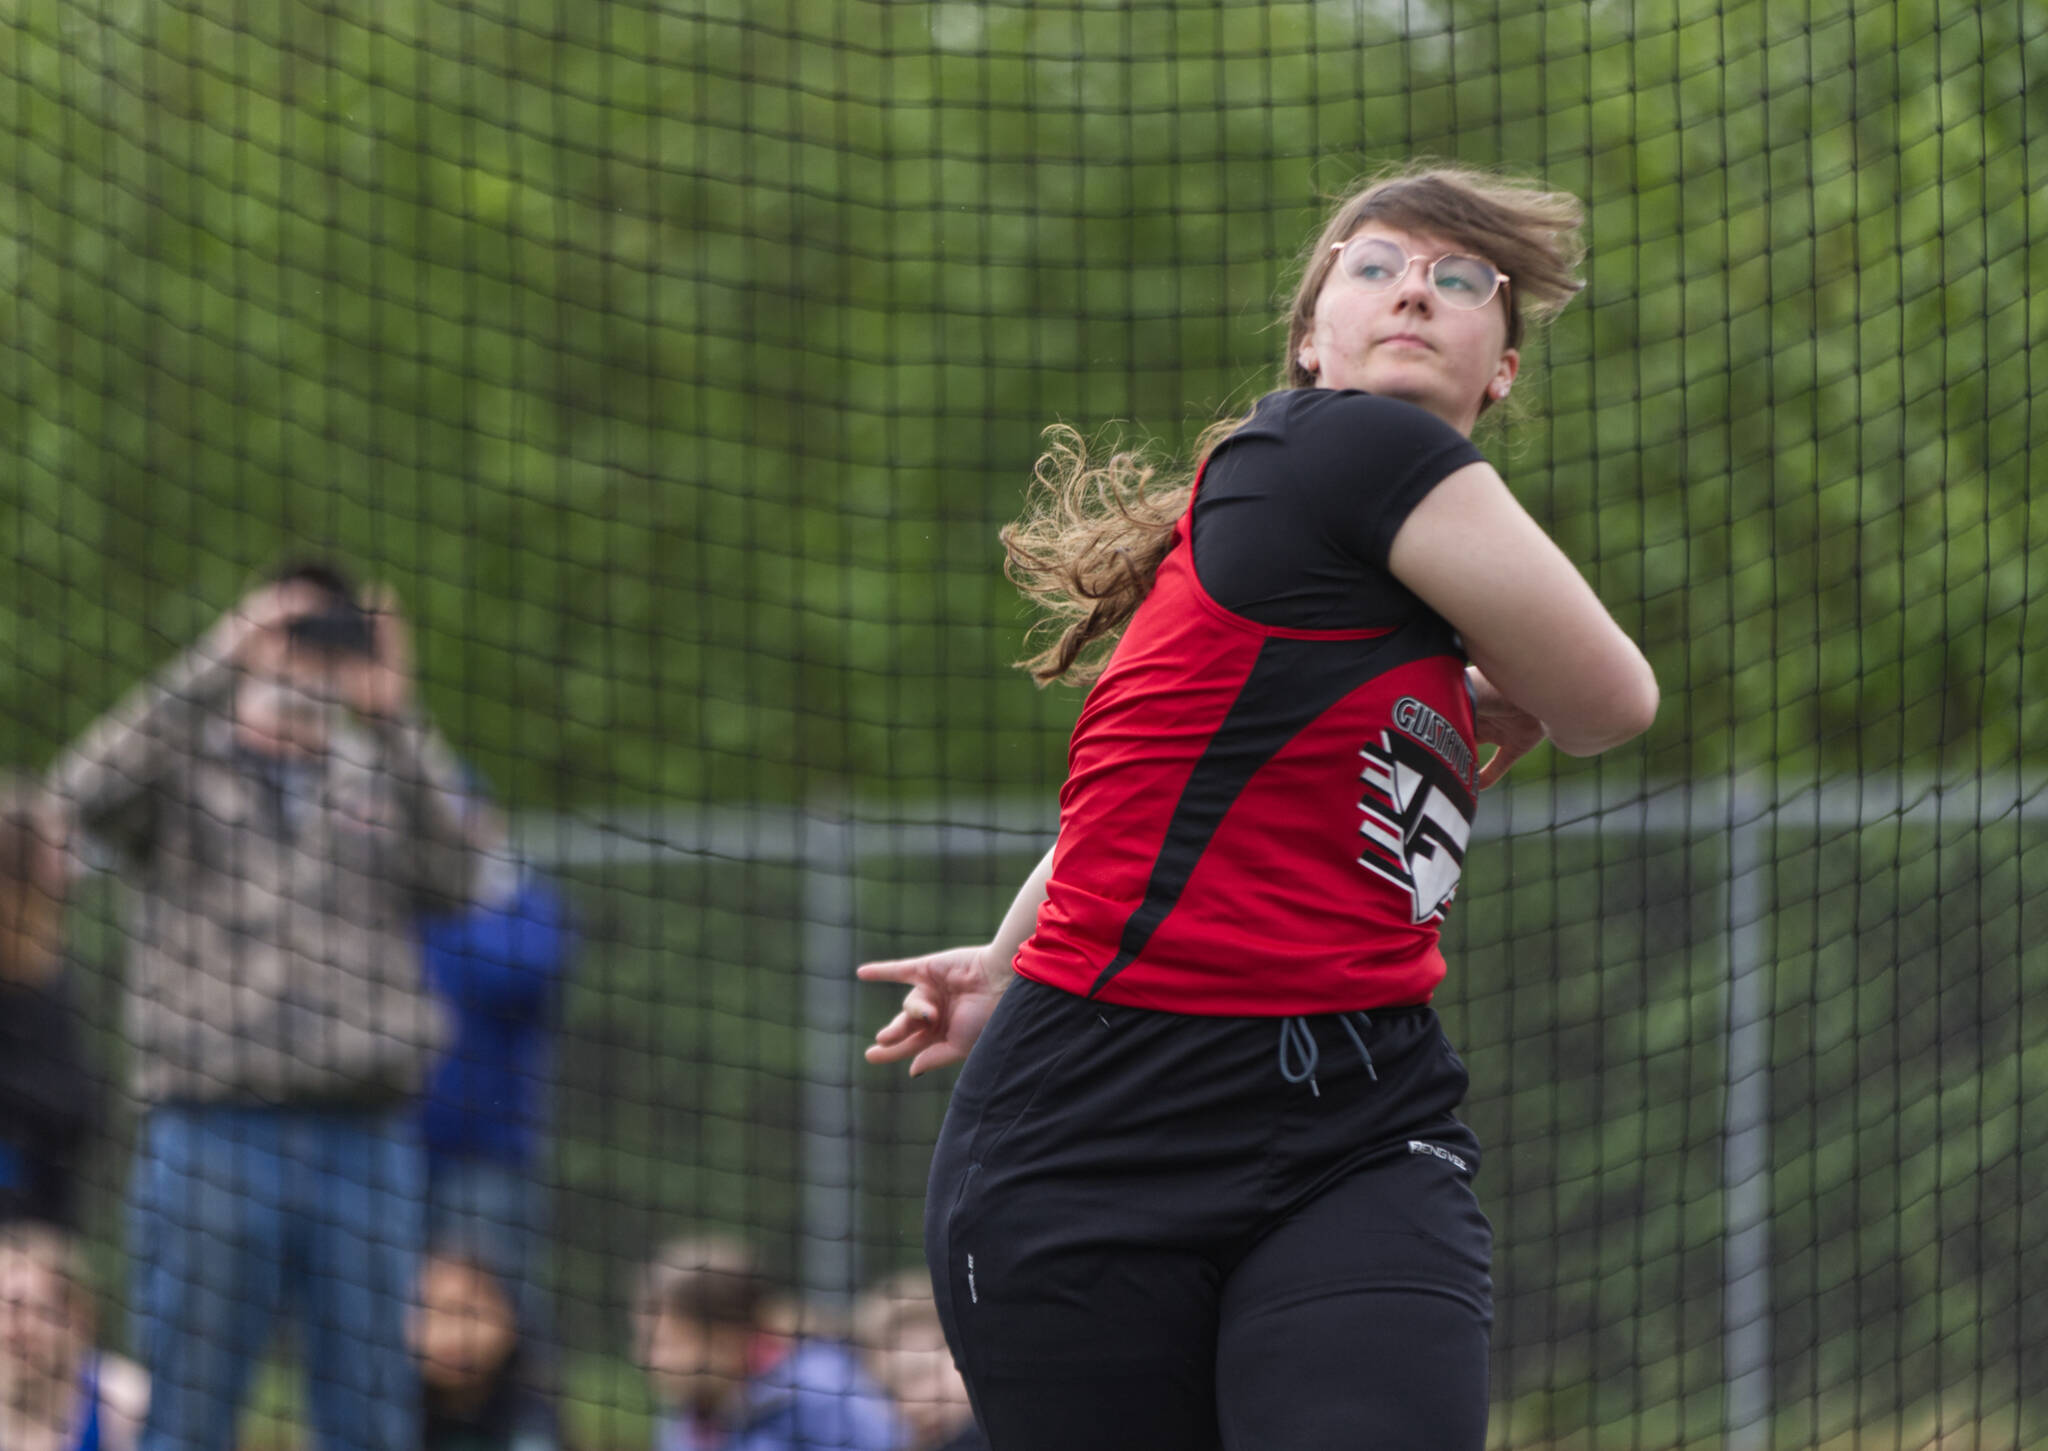 Maddy Wagner, a Gustavus junior, watches the discus fly 81 feet and 6.5 inches Saturday at Thunder Mountain High School. Wagner came in third place for Division II girls in the event during the Region V Track & Field Championships.